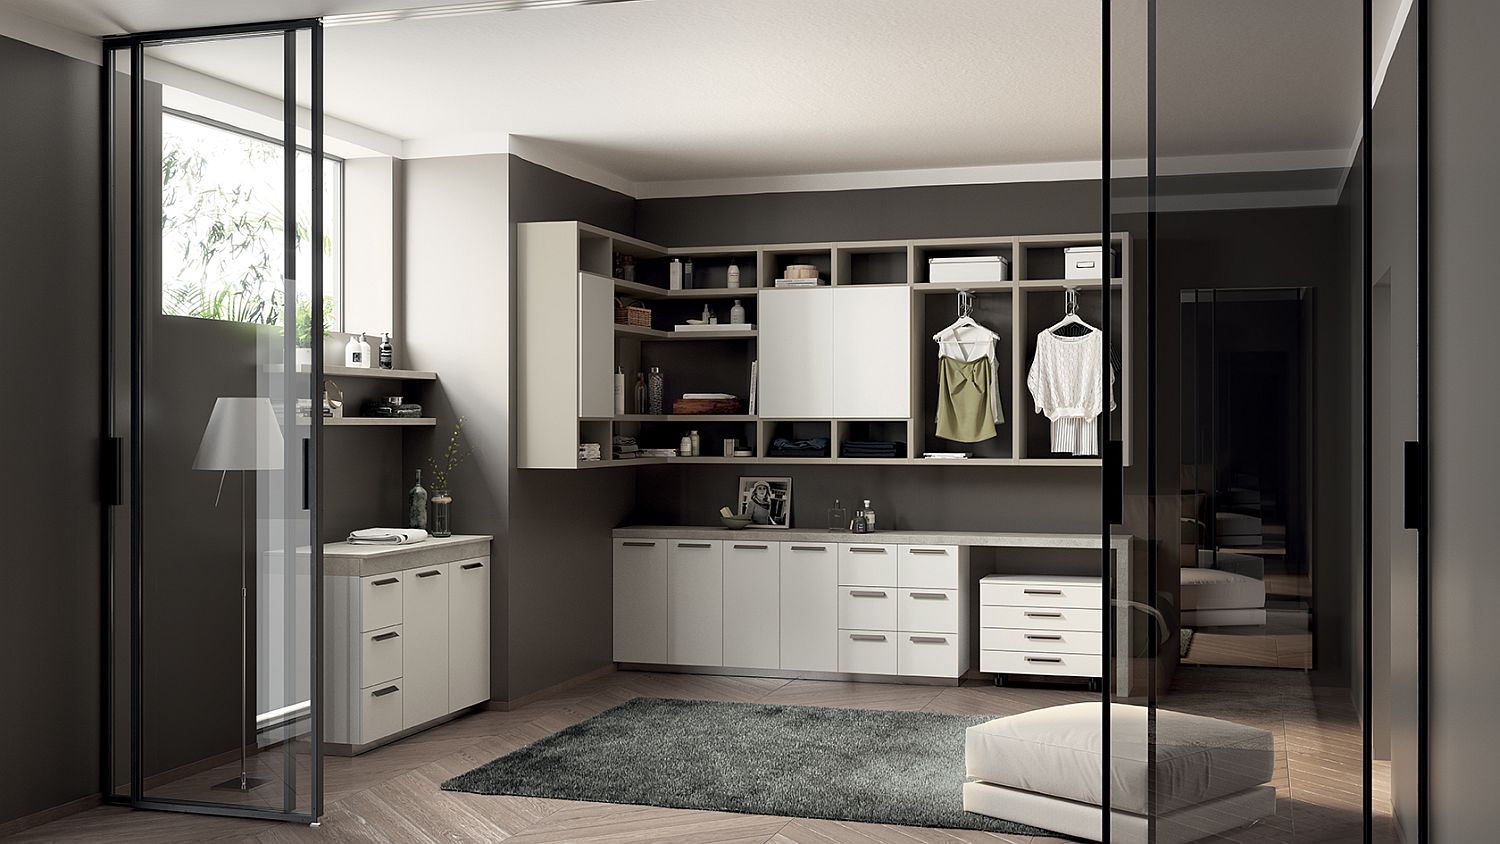 Wardrobes-and-storage-racks-are-combined-with-the-bathroom-and-laundry-space-hybrid